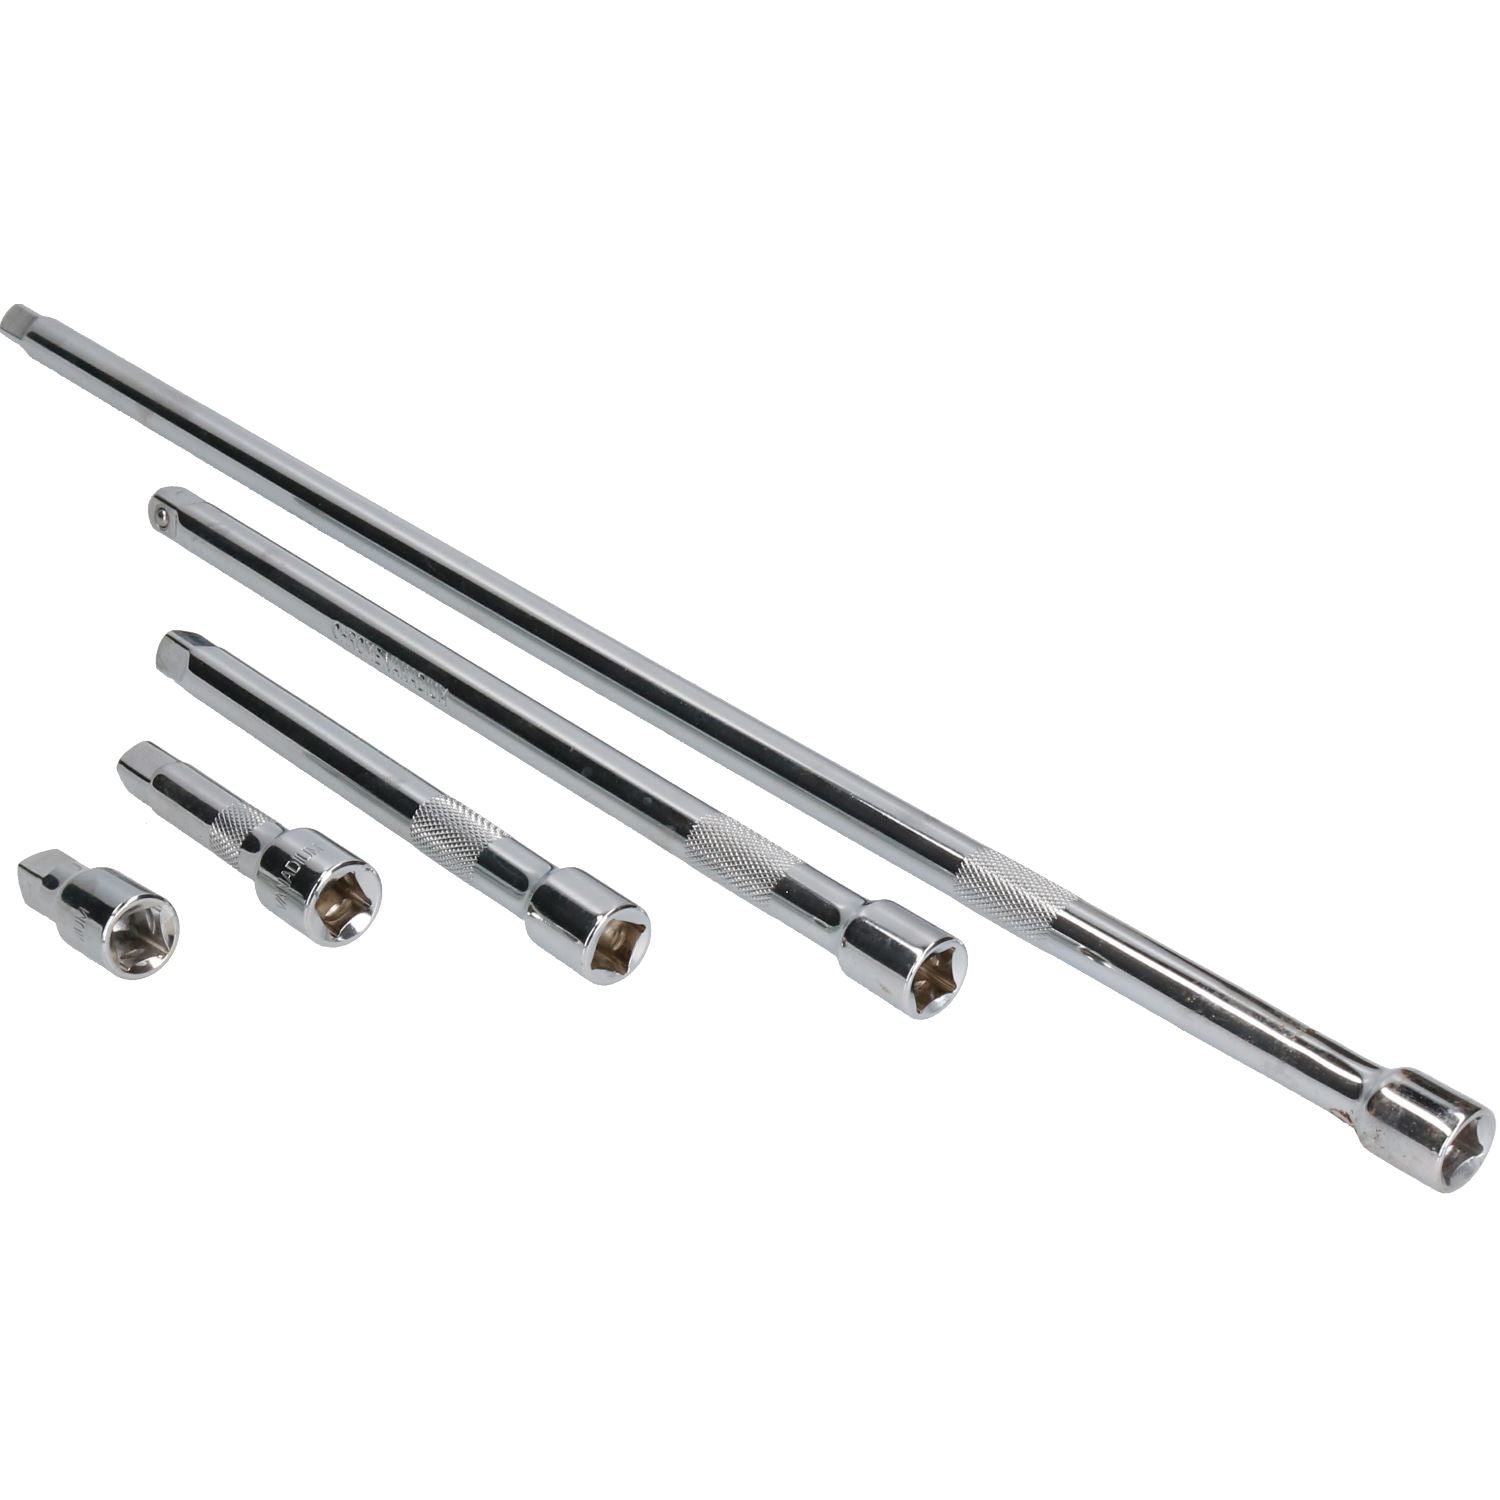 3/8” Drive Extra Long Straight Extension bar Set 38mm – 450mm 5pc For Ratchets